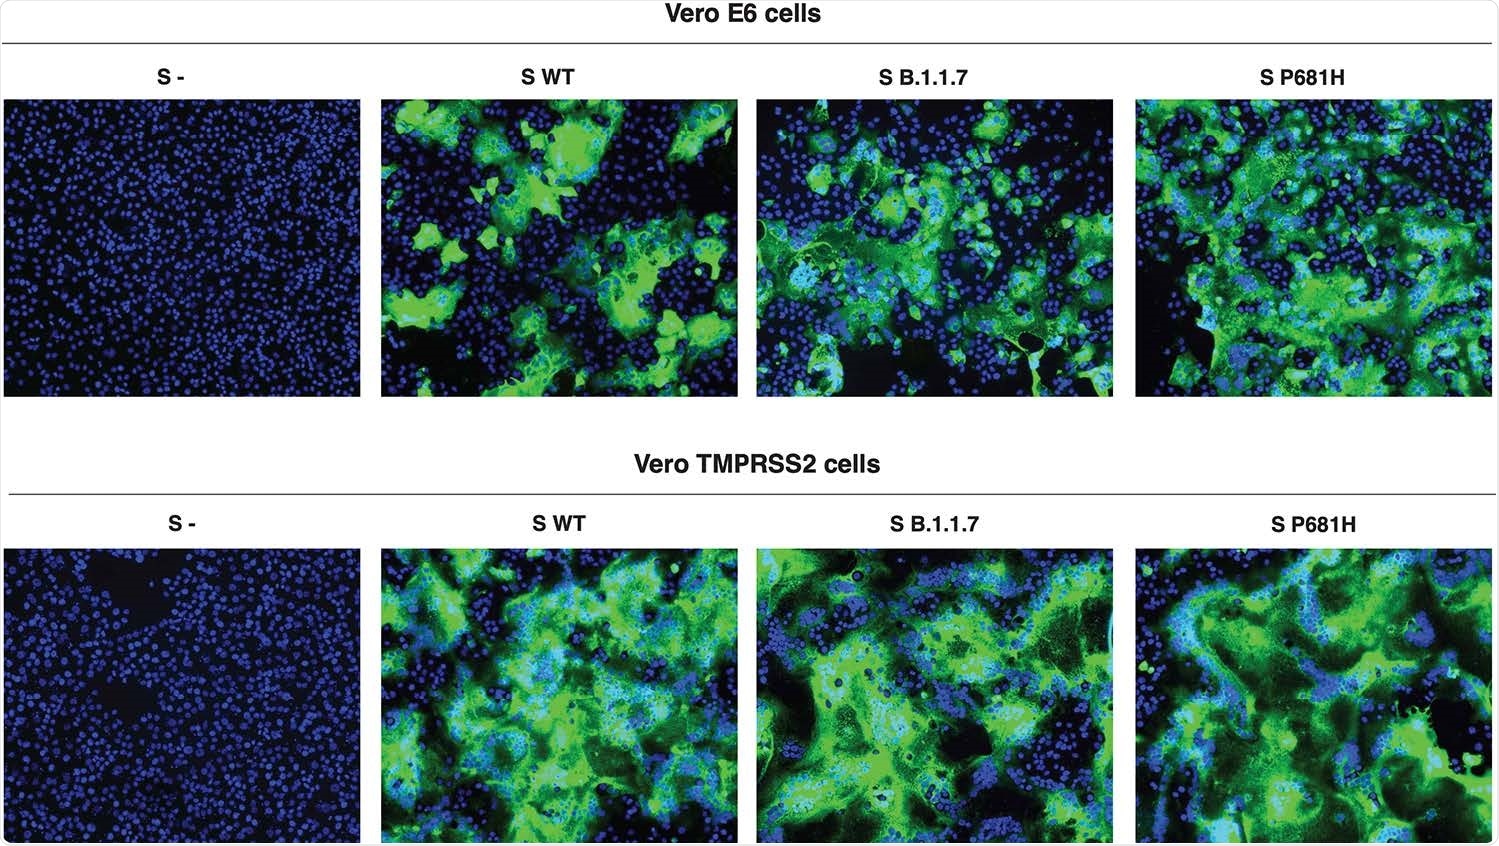 Cell-cell assays of S-expressing VeroE6 and Vero-TMPRSS2 cells. Cells were transfected with the SARS-CoV-2 WT, B.1.1.7 or P681H S gene and syncytia formation was evaluated through IFA after 28 hours. Syncytia was observed in all cells, regardless the expressed S type. More extensive syncytia formation was observed in Vero-TMPRSS2 cells and was consistent among the three S proteins.